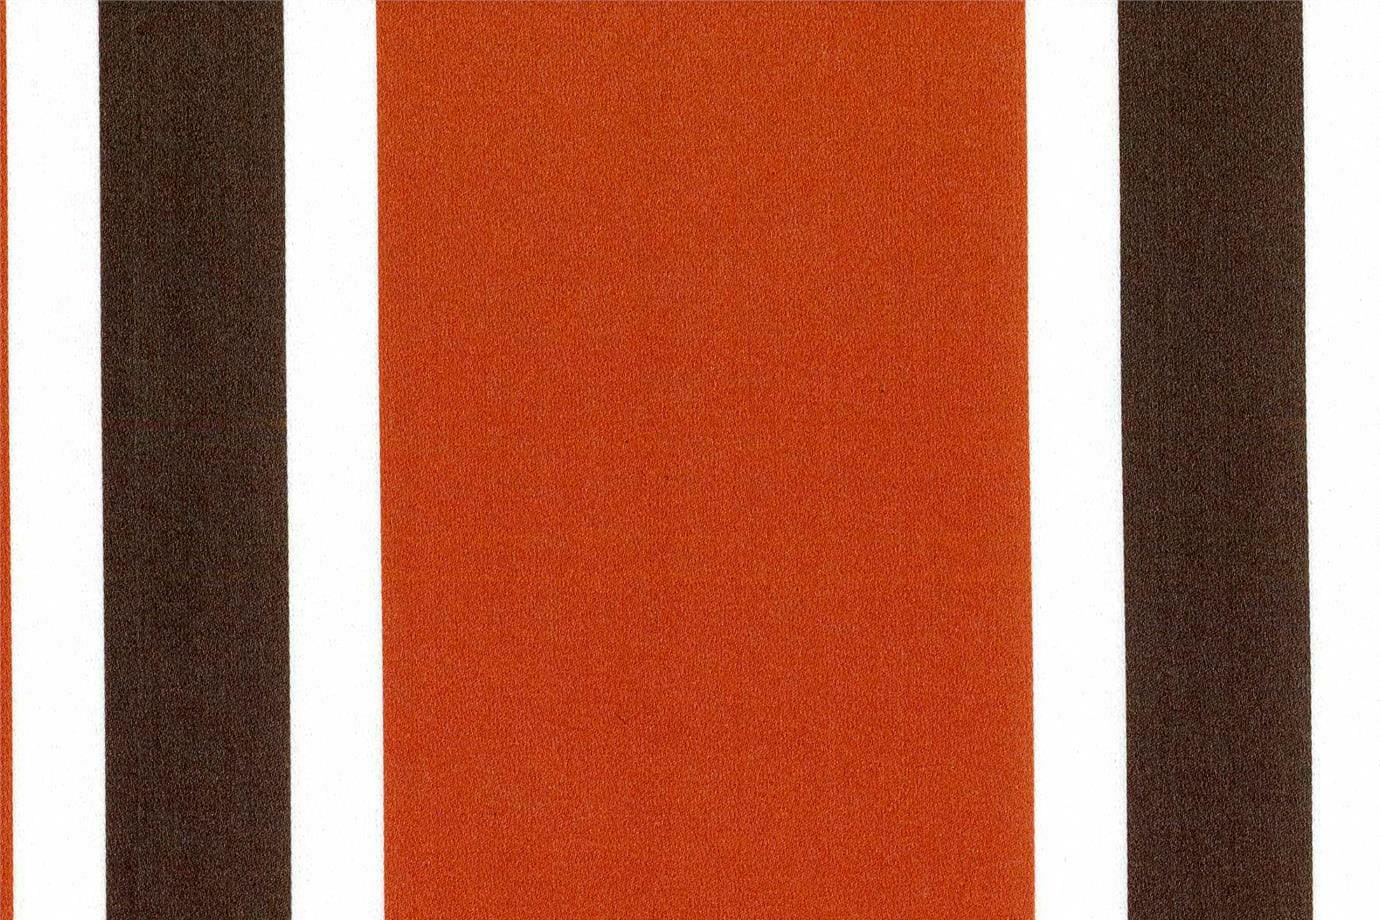 J1652 GIOPPINO 005 Rosso home decoration fabric